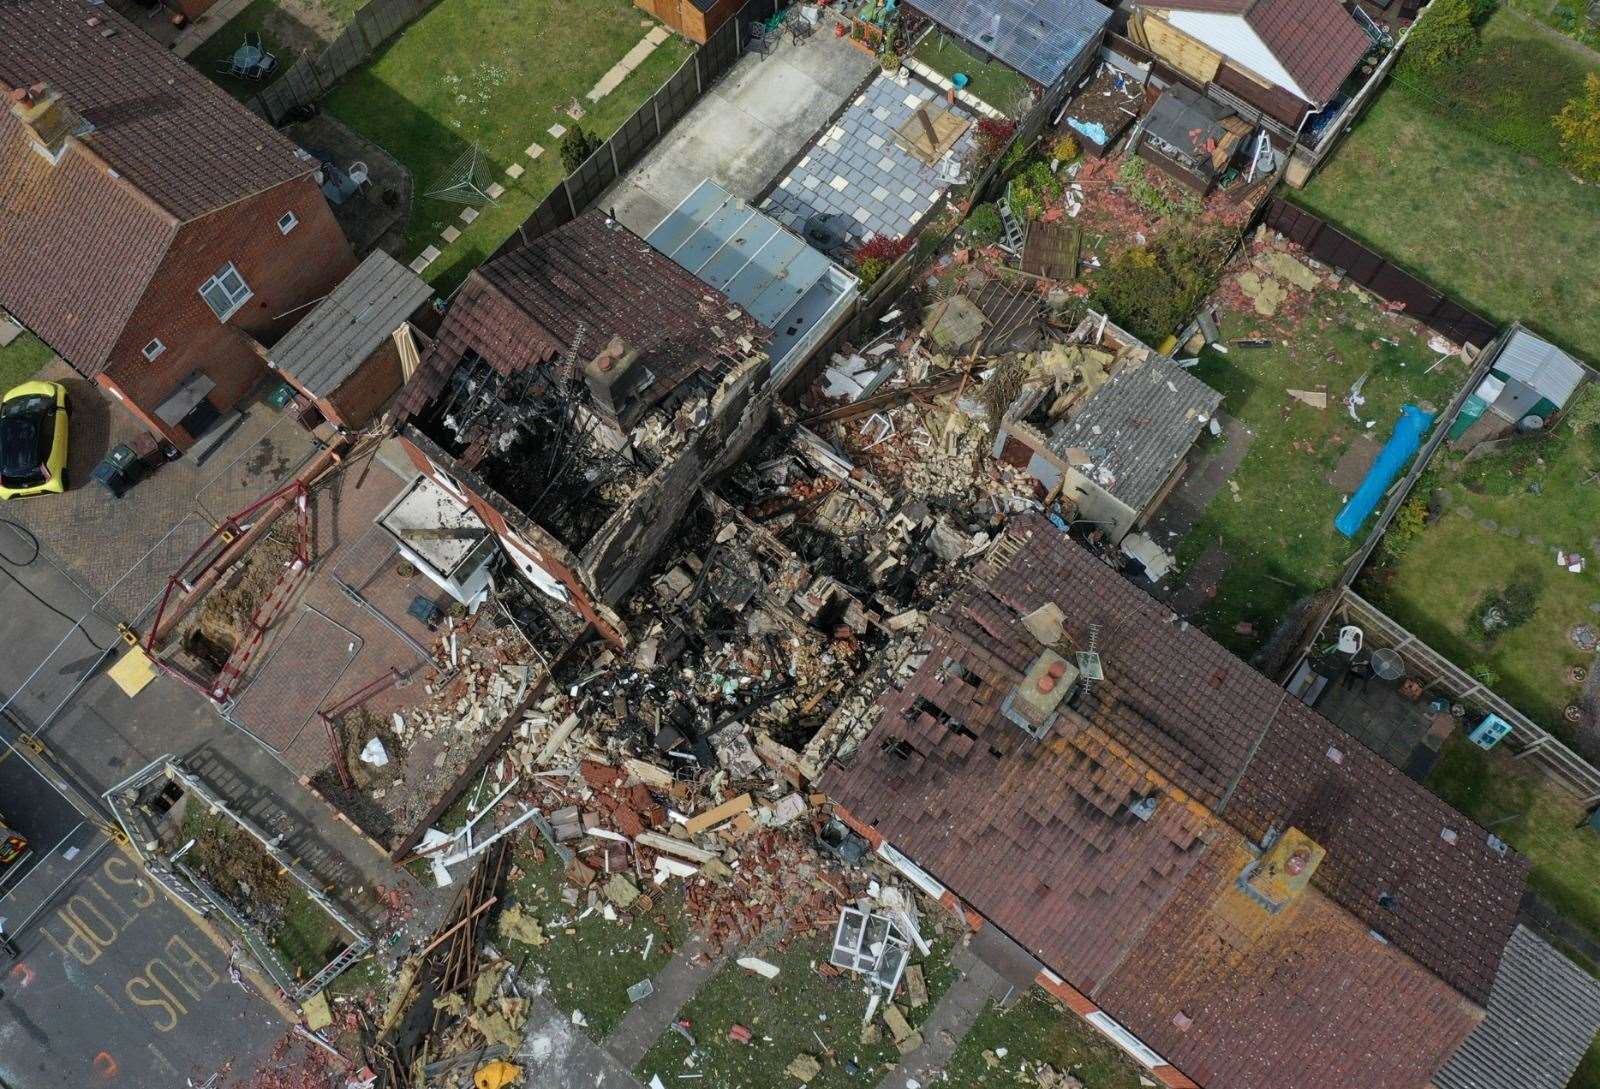 The devastation left after an explosion in Ashford. Picture: UKNiP